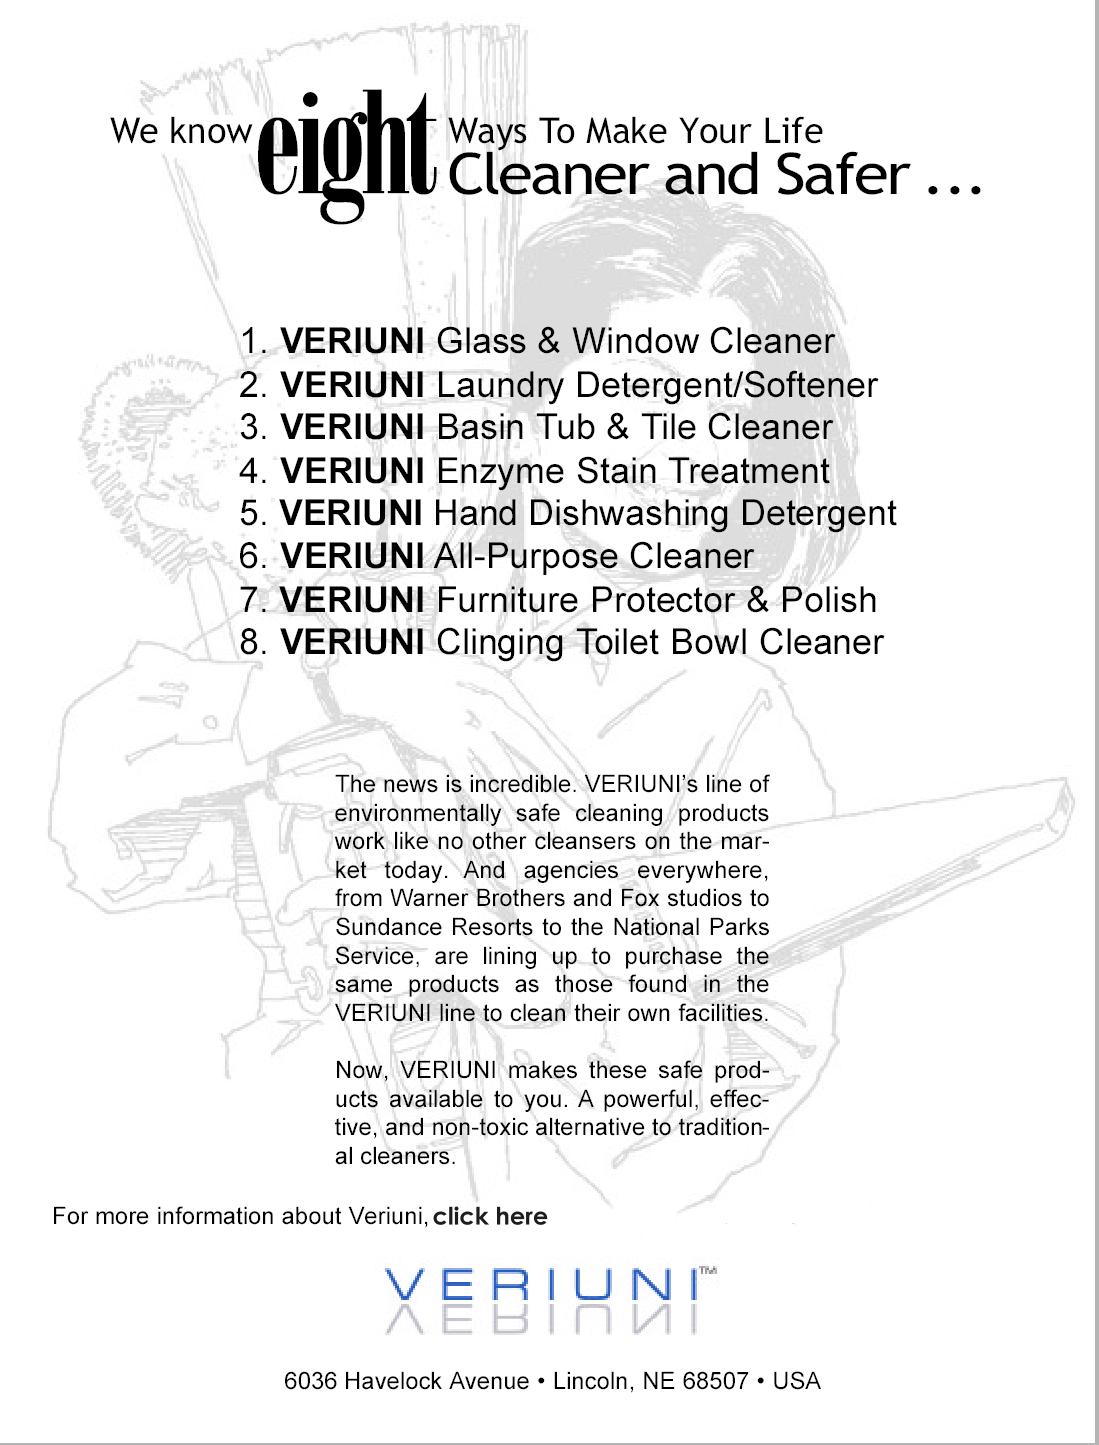 veriuni safe cleaning products